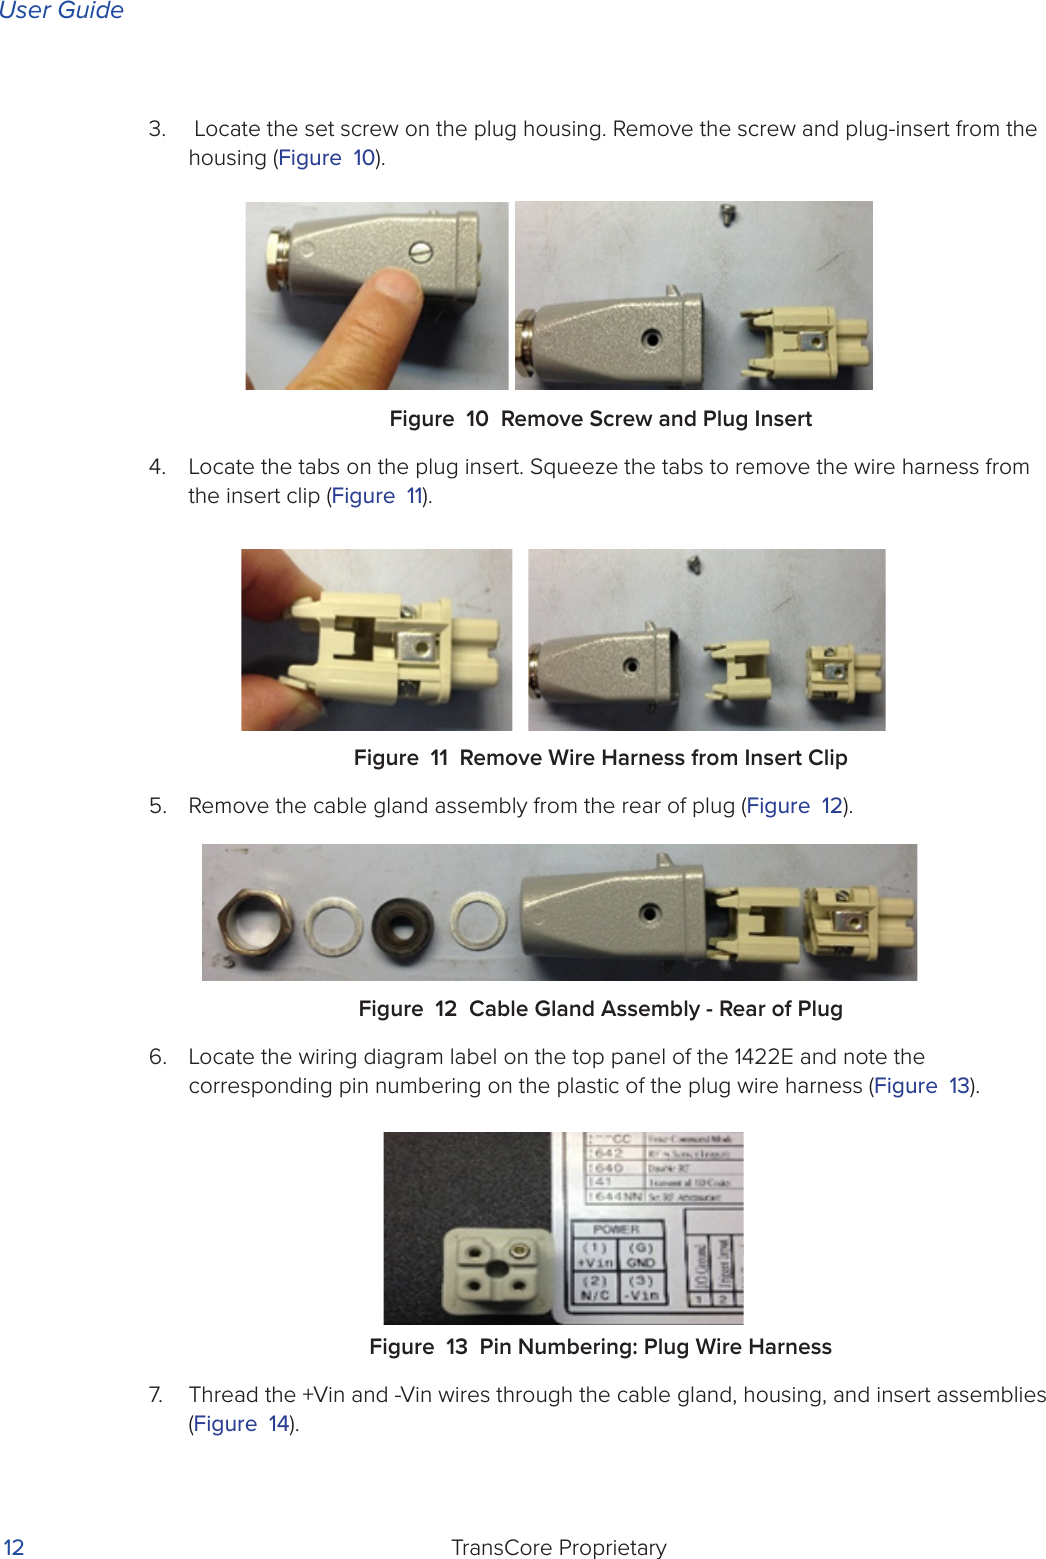 User GuideTransCore Proprietary 123.   Locate the set screw on the plug housing. Remove the screw and plug-insert from the housing (Figure 10).Figure 10 Remove Screw and Plug Insert4.  Locate the tabs on the plug insert. Squeeze the tabs to remove the wire harness from the insert clip (Figure 11).Figure 11 Remove Wire Harness from Insert Clip 5.  Remove the cable gland assembly from the rear of plug (Figure 12). Figure 12 Cable Gland Assembly - Rear of Plug6.  Locate the wiring diagram label on the top panel of the 1422E and note the corresponding pin numbering on the plastic of the plug wire harness (Figure 13).Figure 13 Pin Numbering: Plug Wire Harness7.  Thread the +Vin and -Vin wires through the cable gland, housing, and insert assemblies (Figure 14).